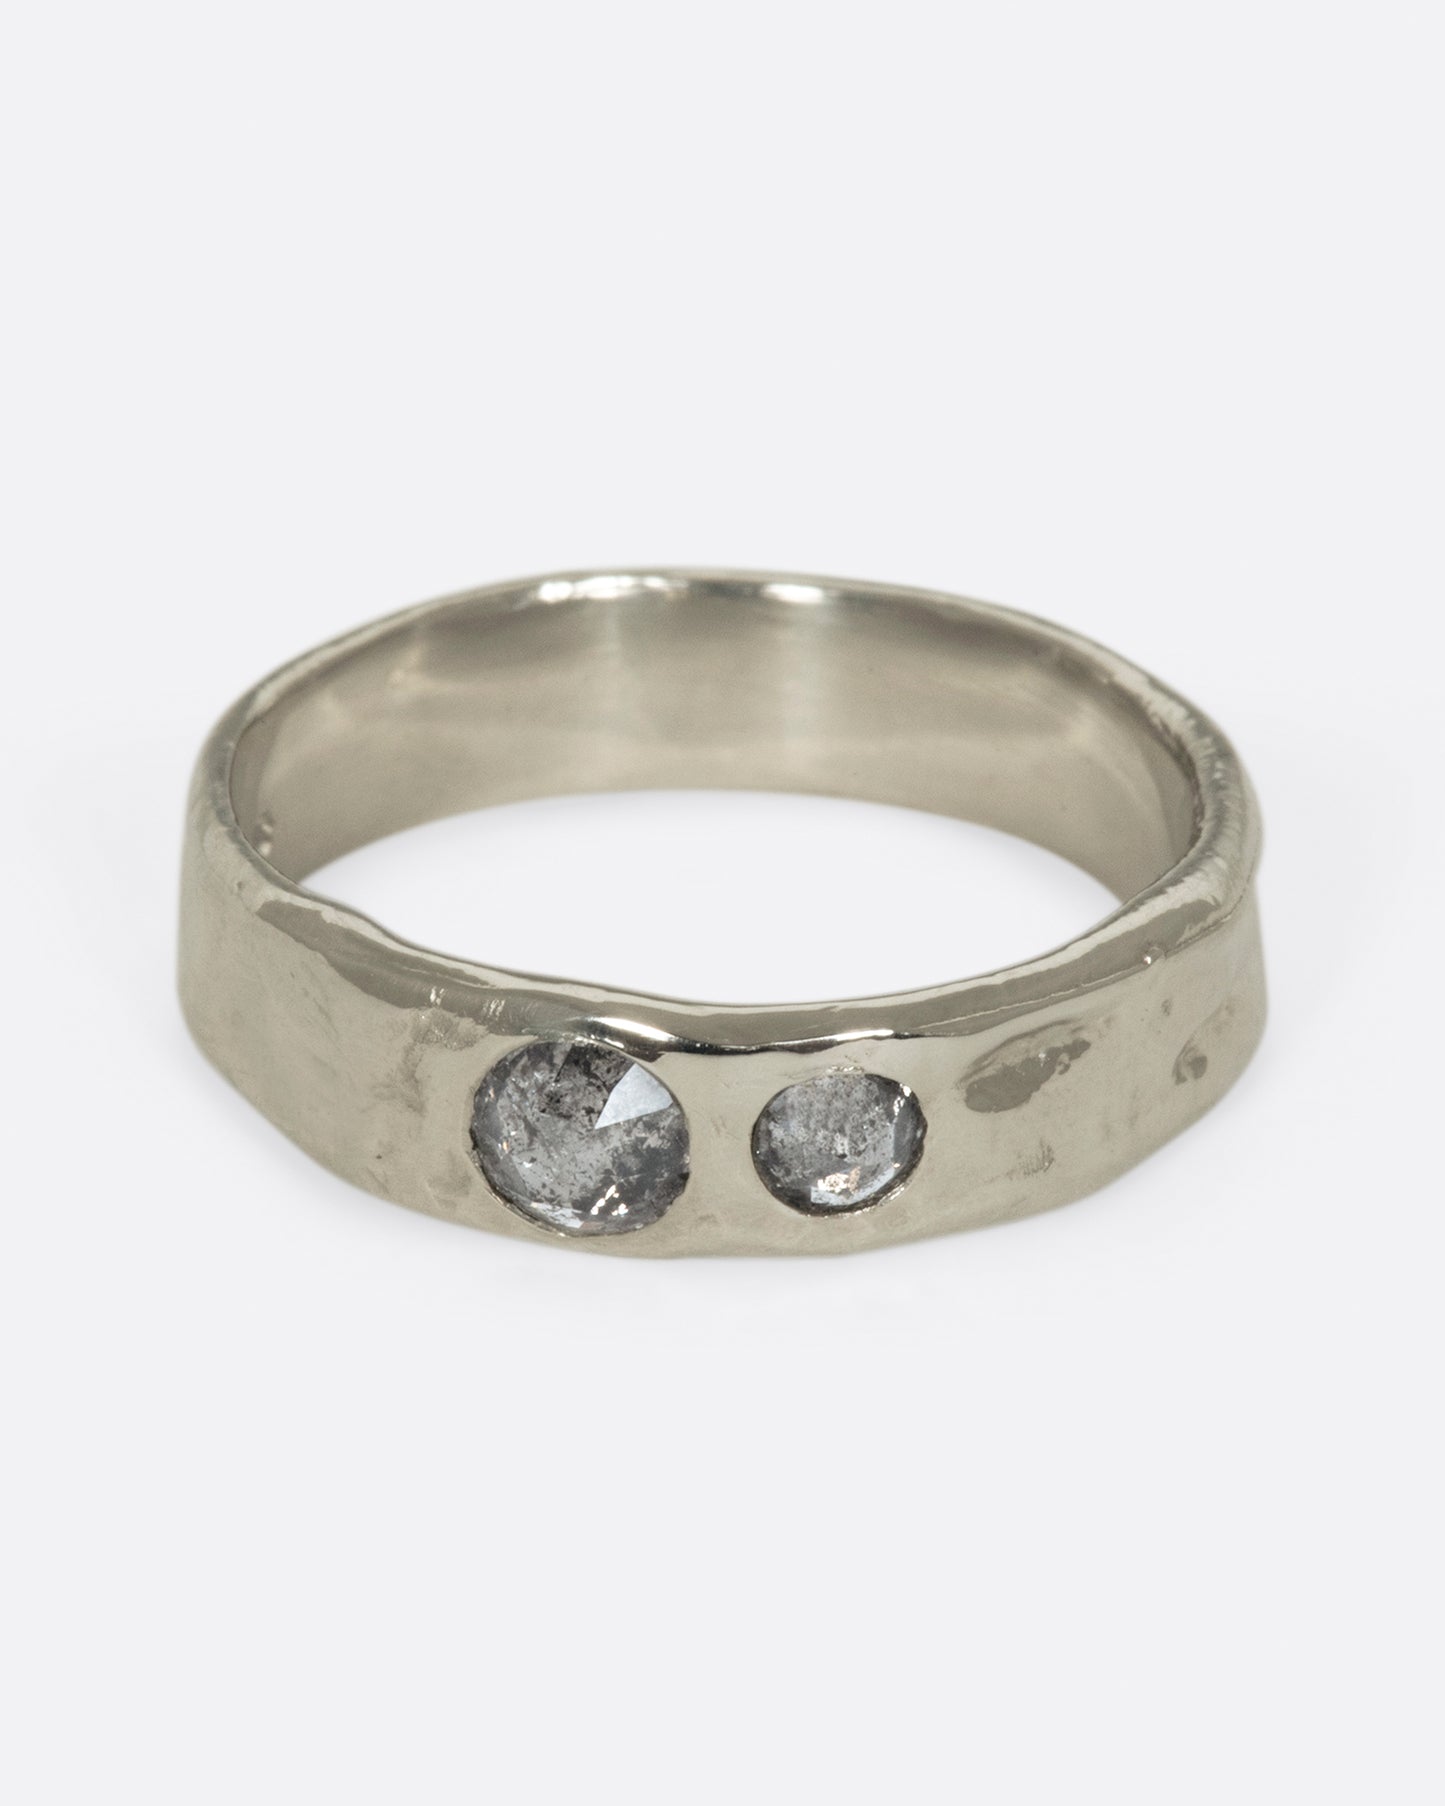 Medium wide band with light texture, featuring two rose cut salt & pepper diamonds flush to the band. 